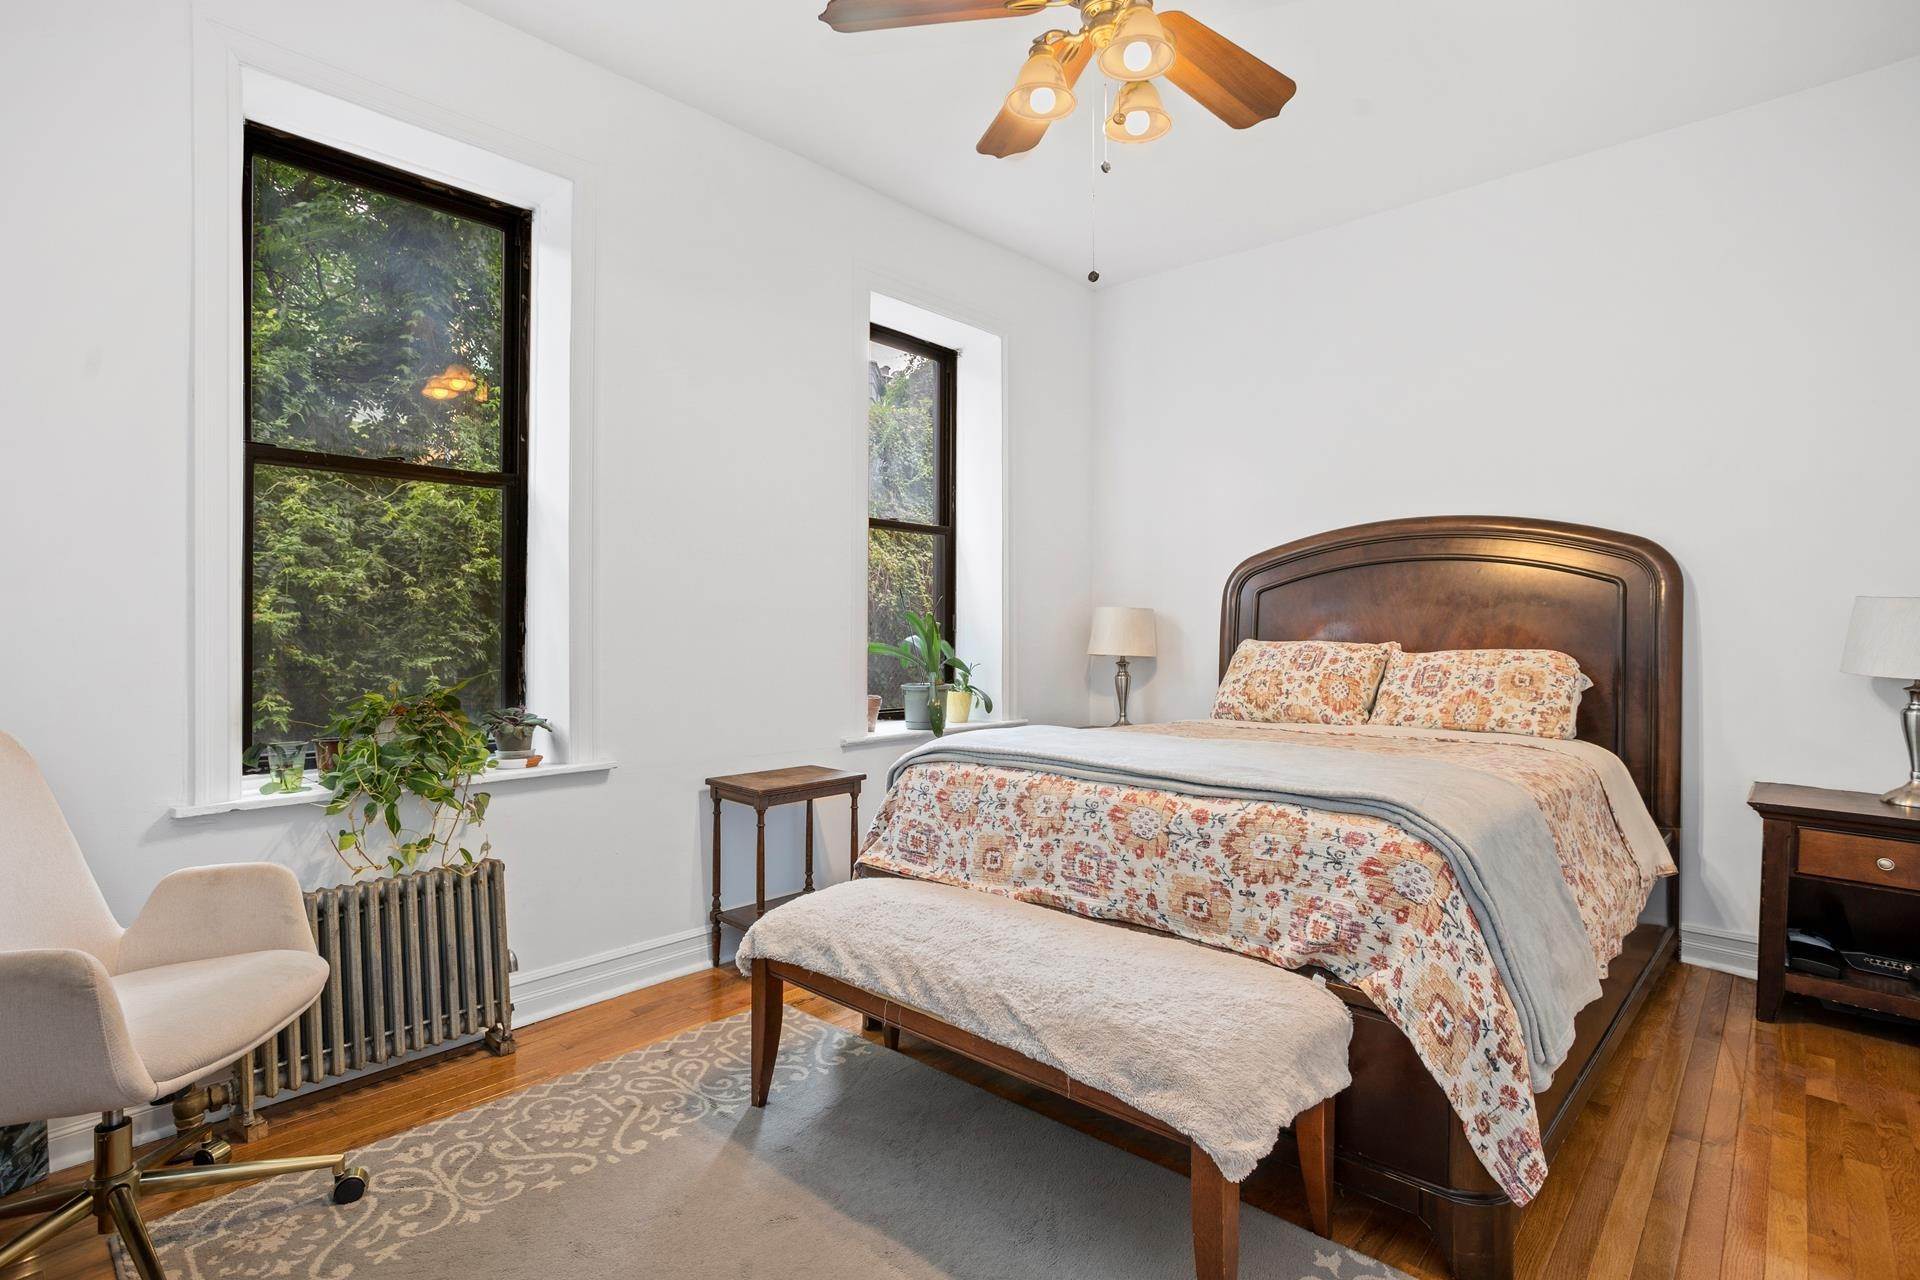 Cooperative for Sale at Prospect Lefferts Gardens, Brooklyn, NY 11225